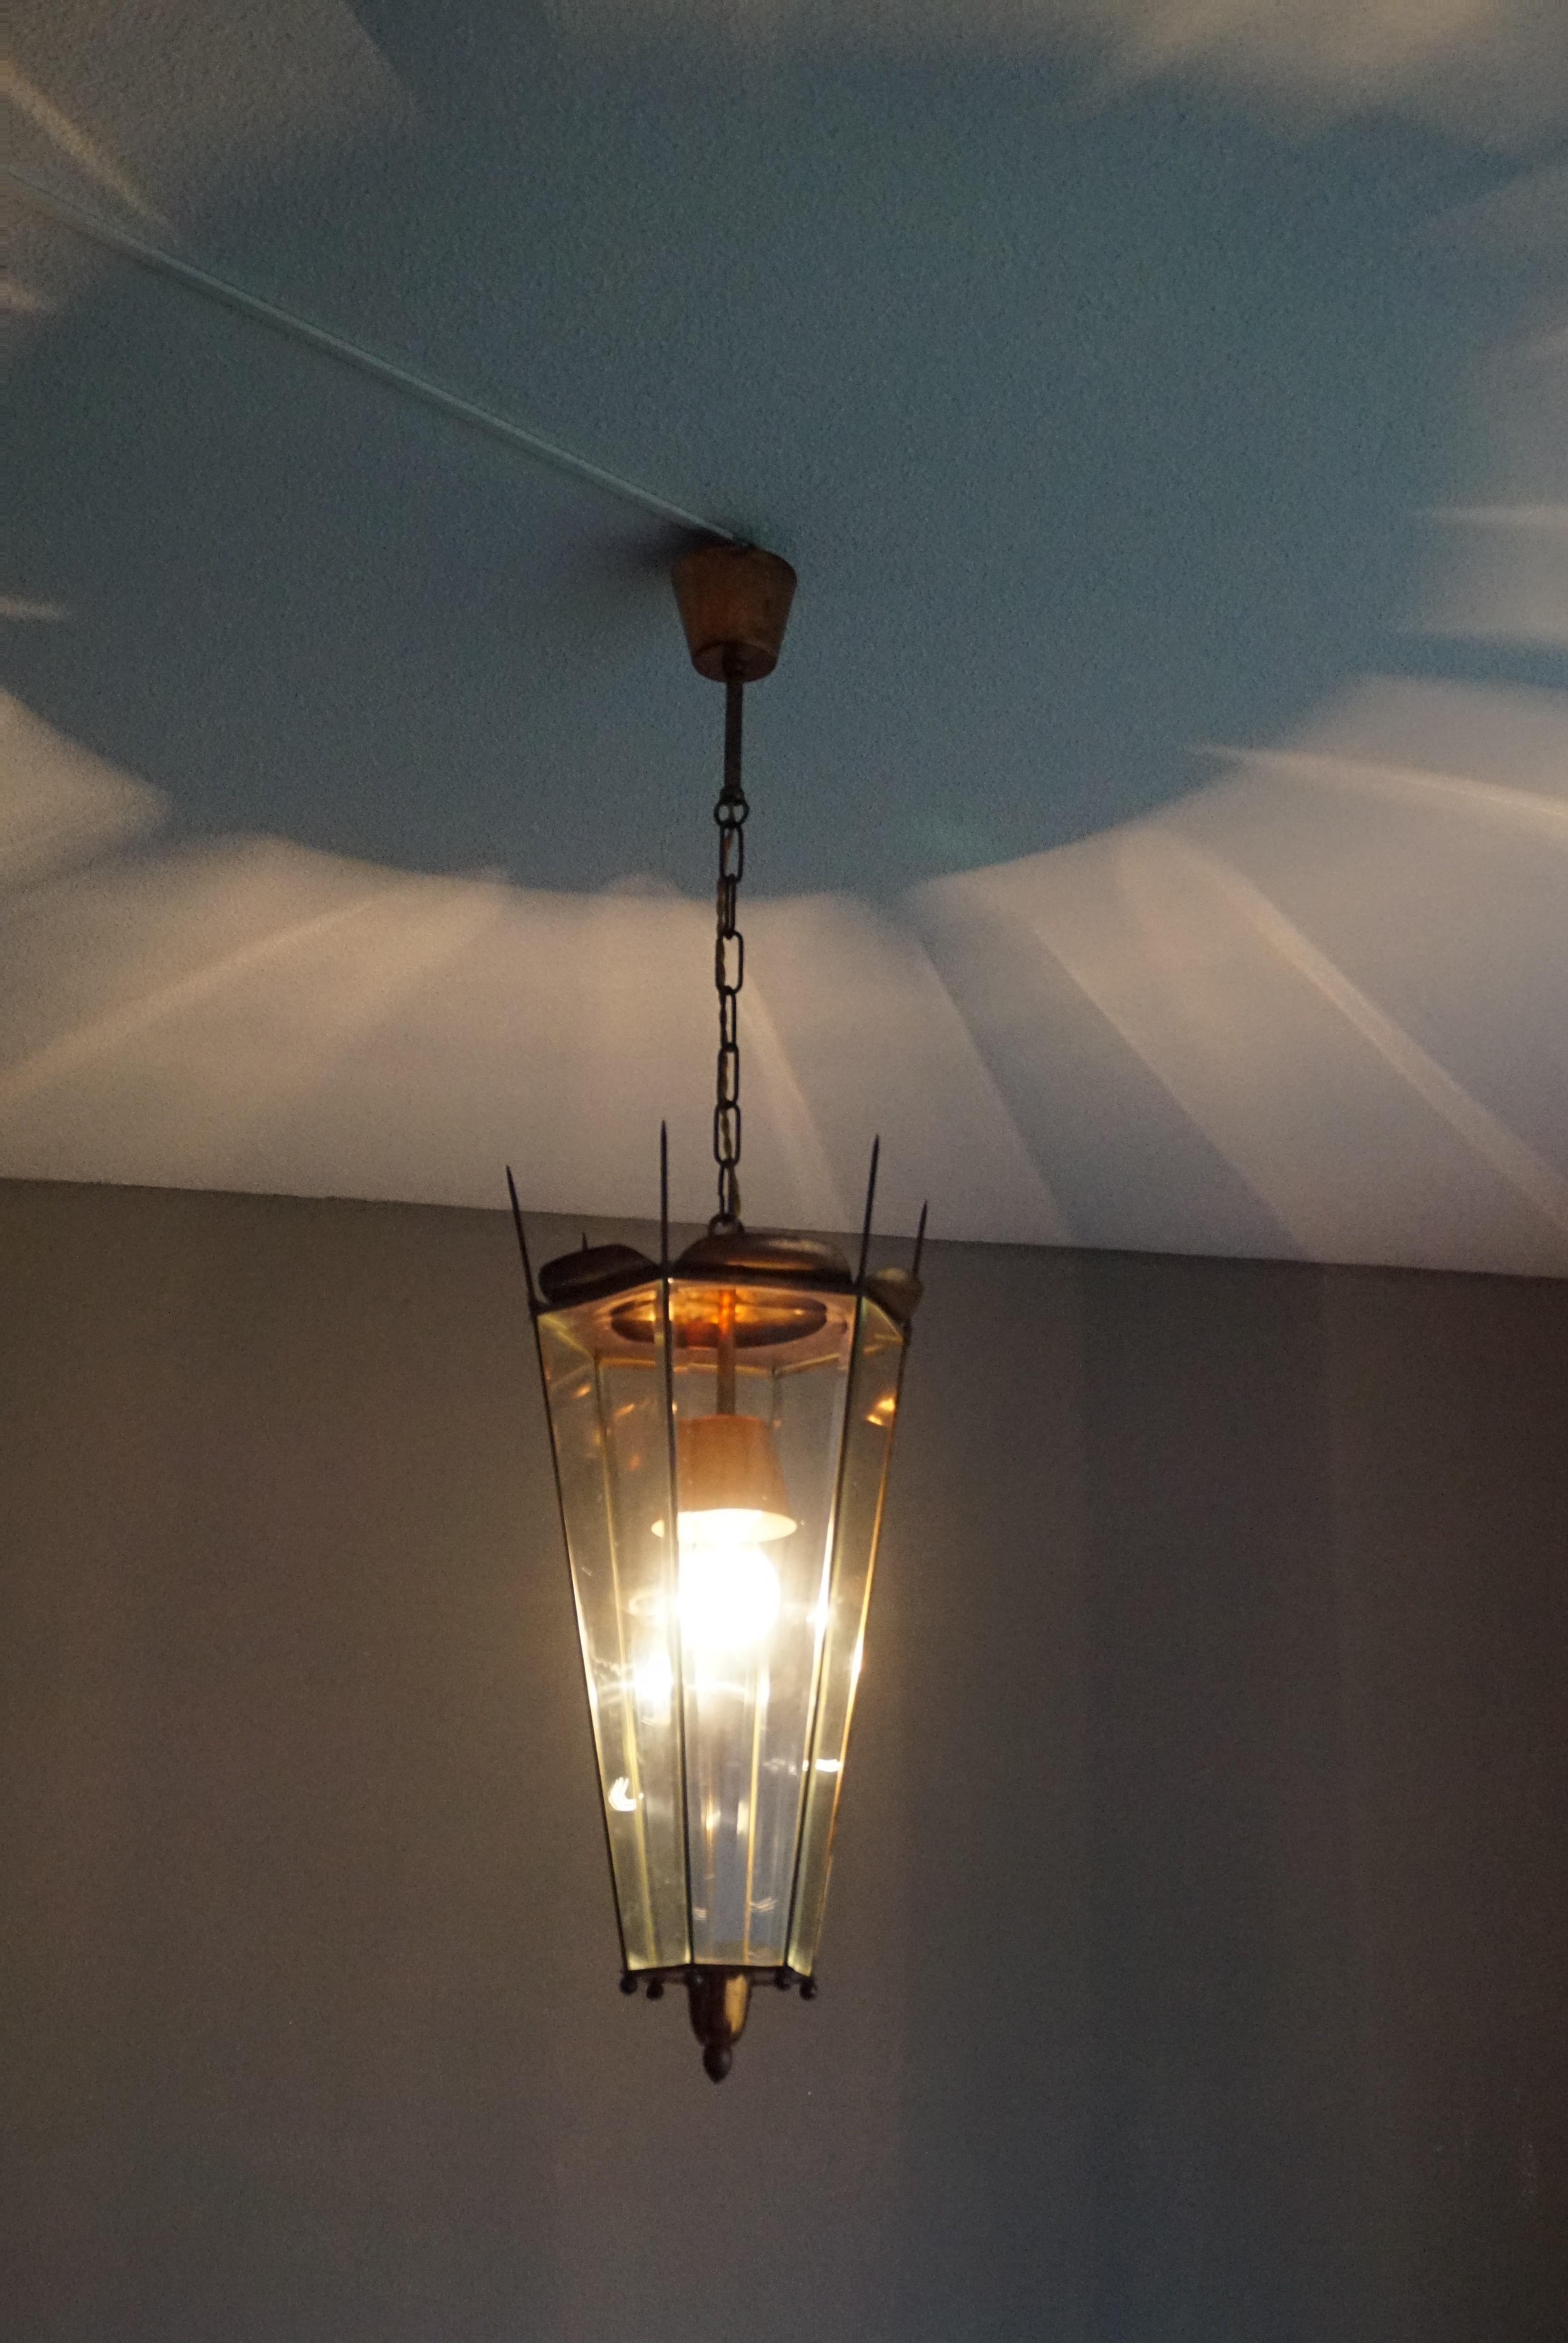 Stunning design and all original, handcrafted pendant light, Italy, 1960s.

For the Mid-Century Modern design enthousiasts and collectors we have brought this remarkable 1950s or 1960s hallway pendant home from our travels to Italy. The combination